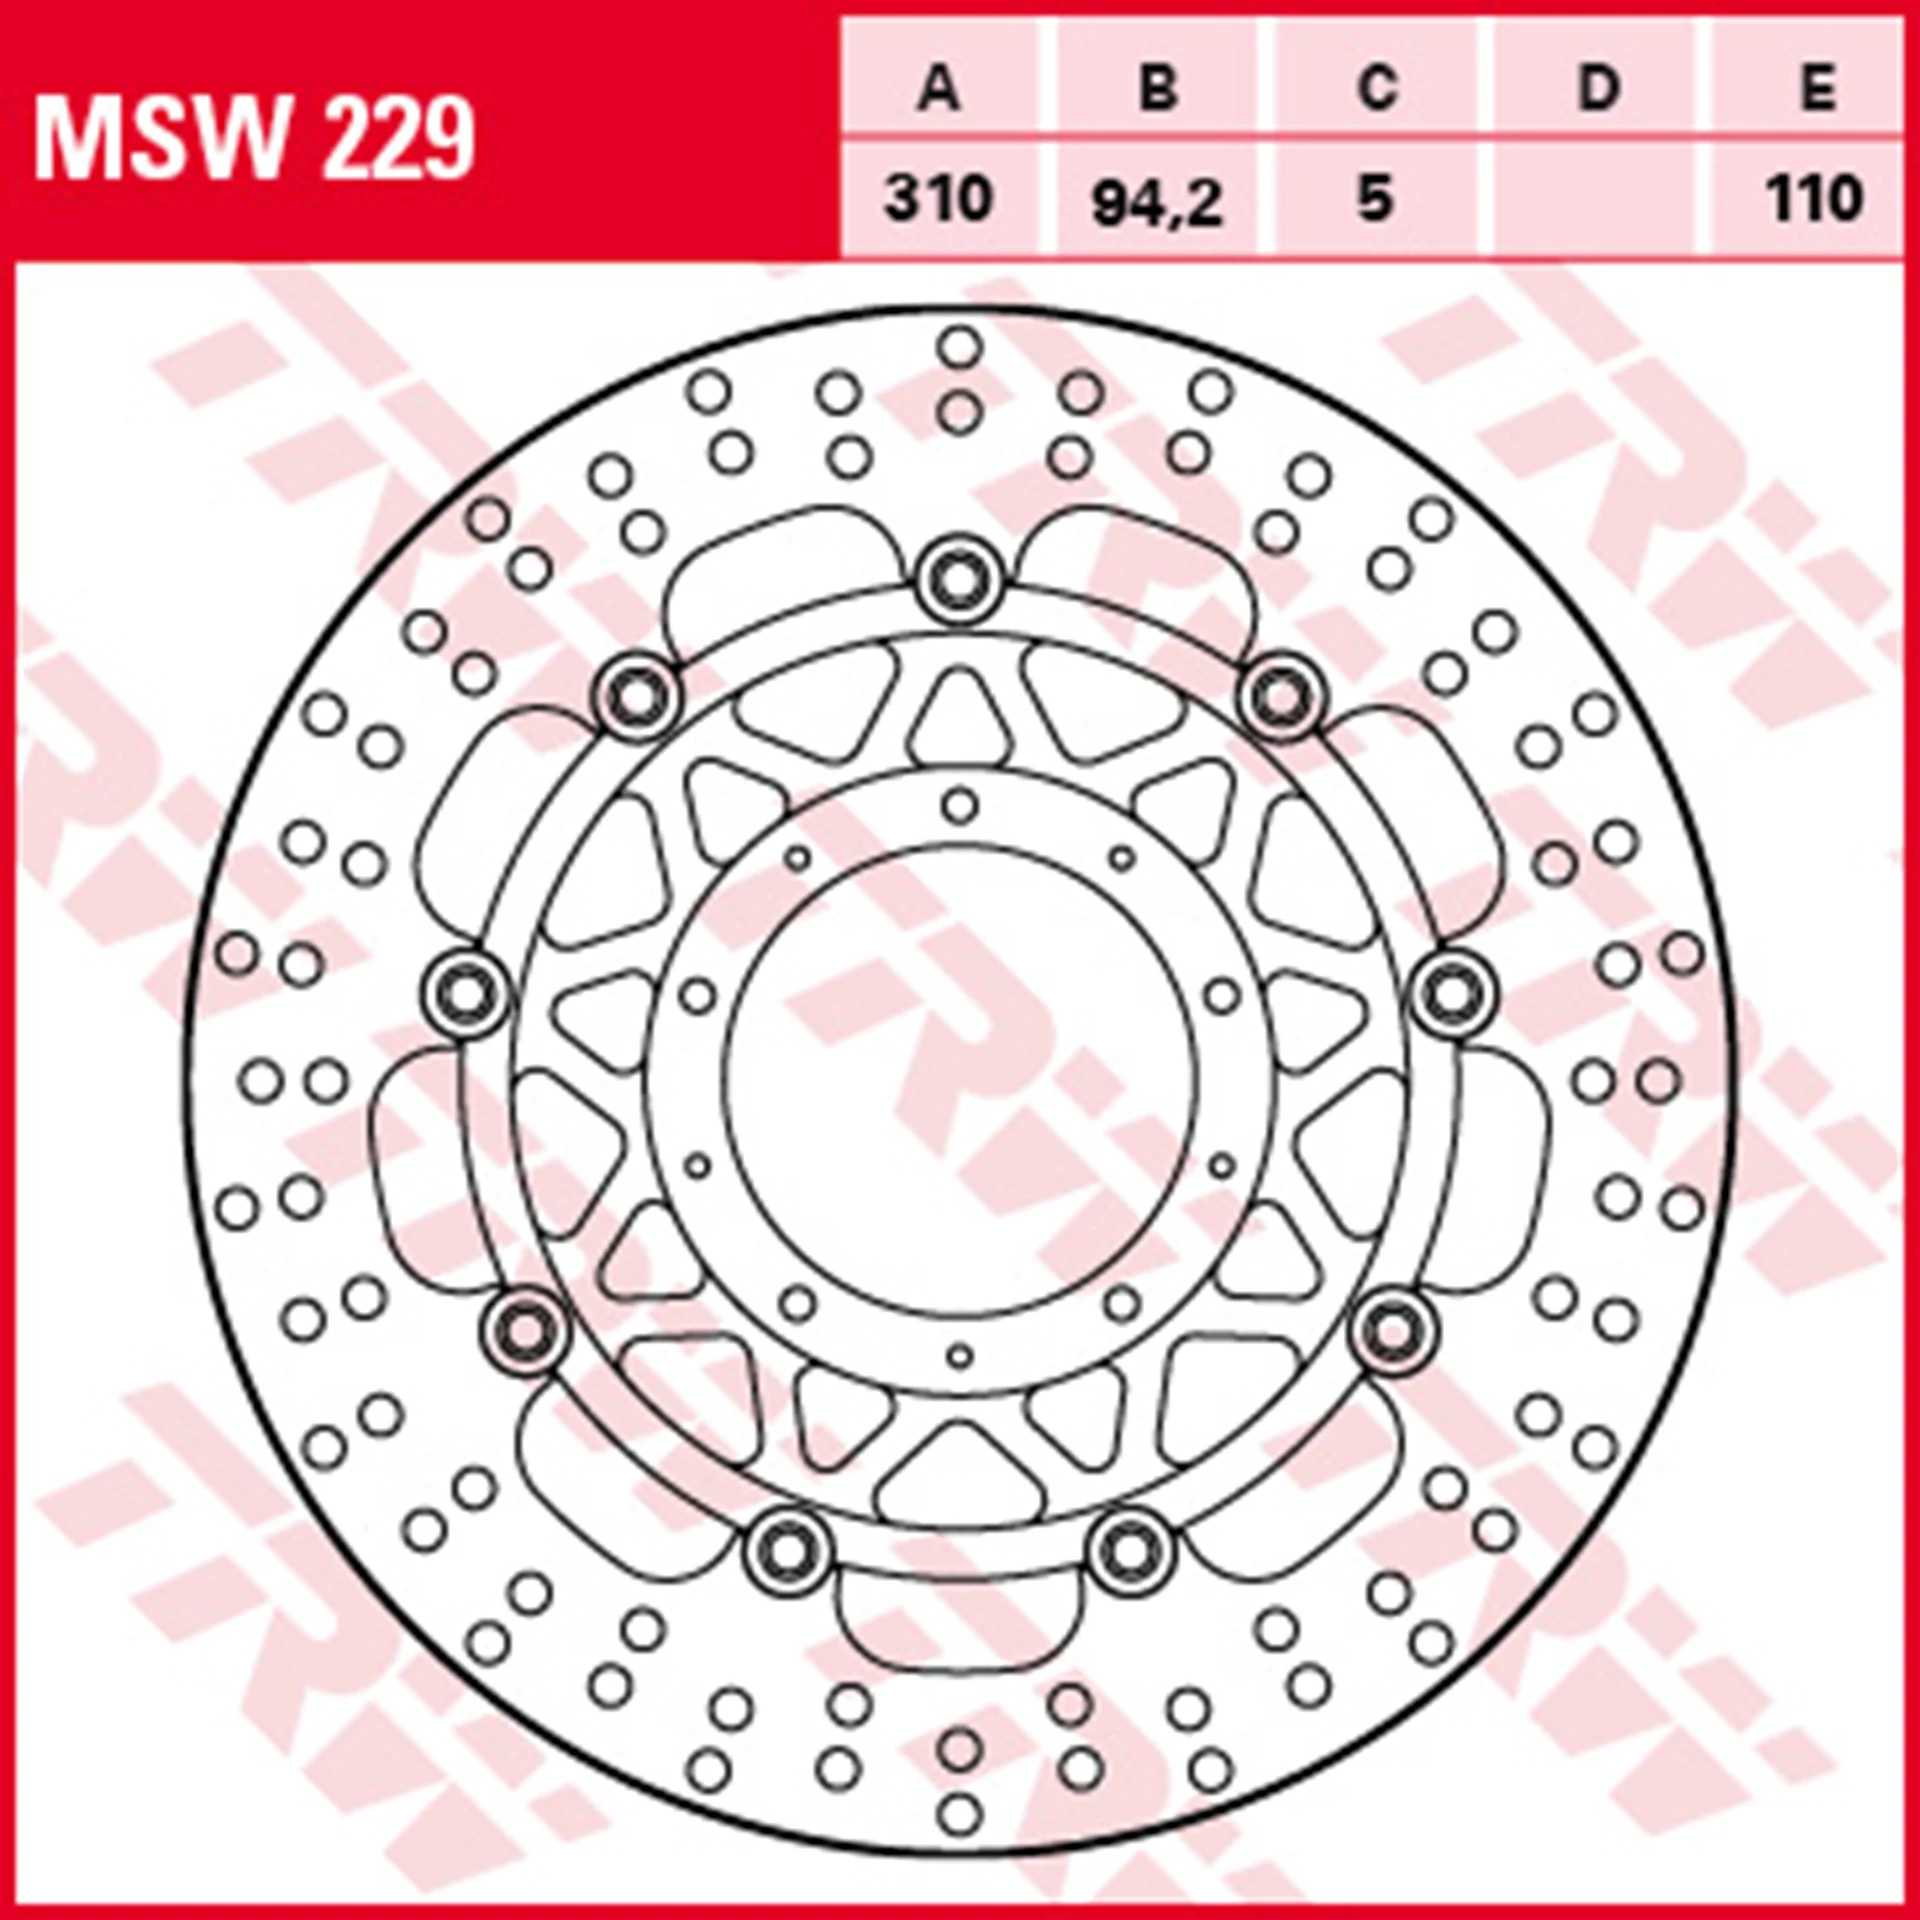 MSW229